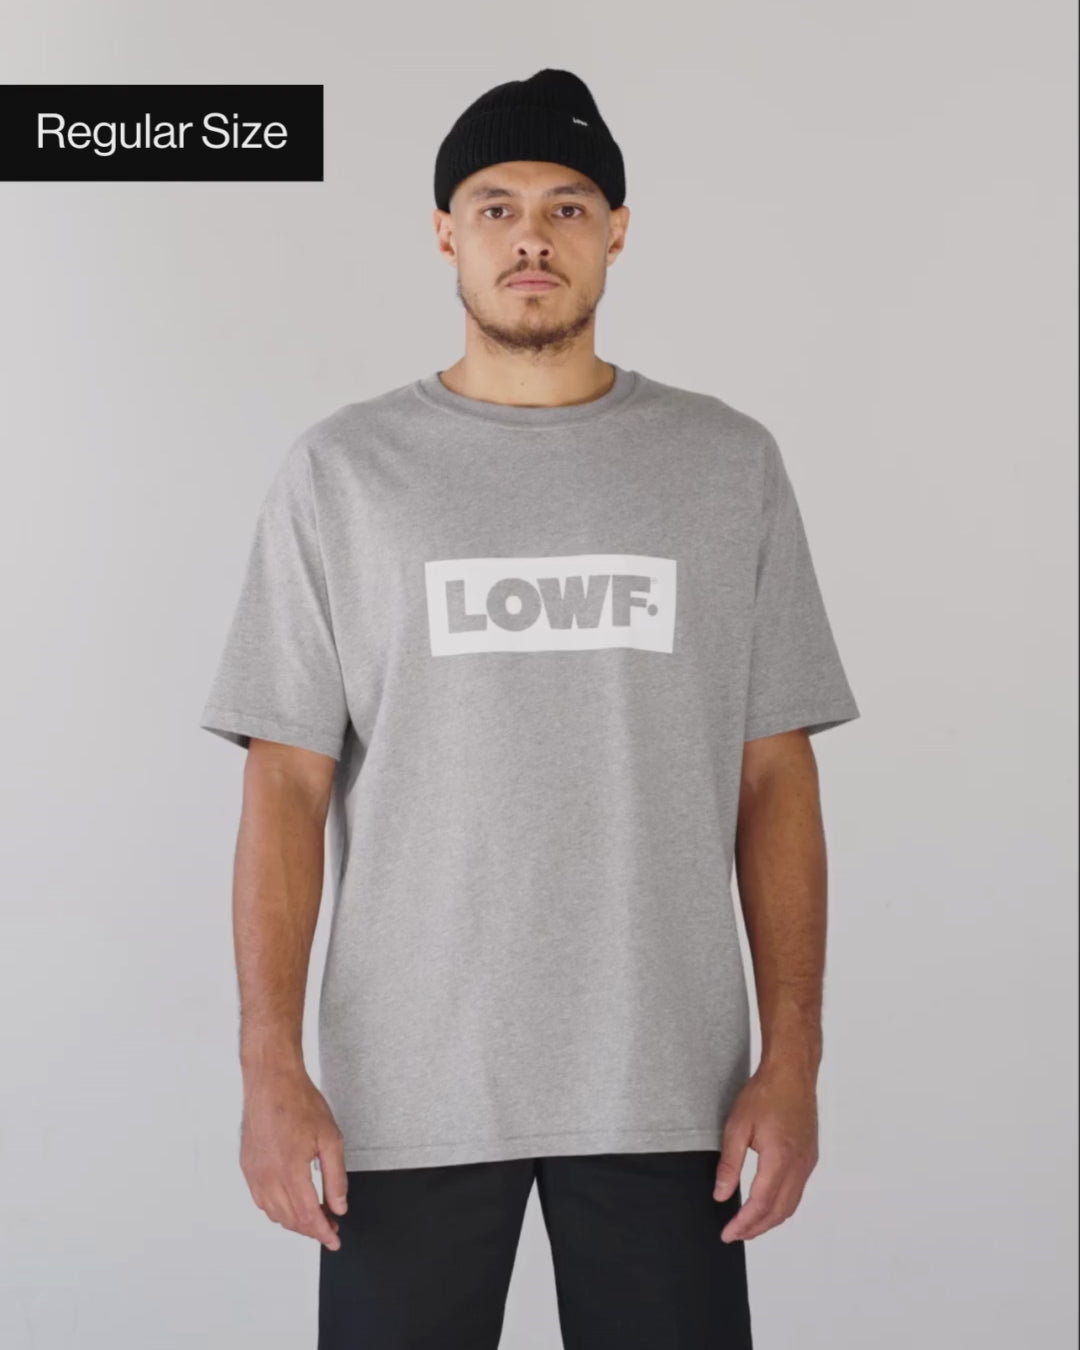 Video showing the sizing of a LOWF t-shirt in your regular size, compared to one size up